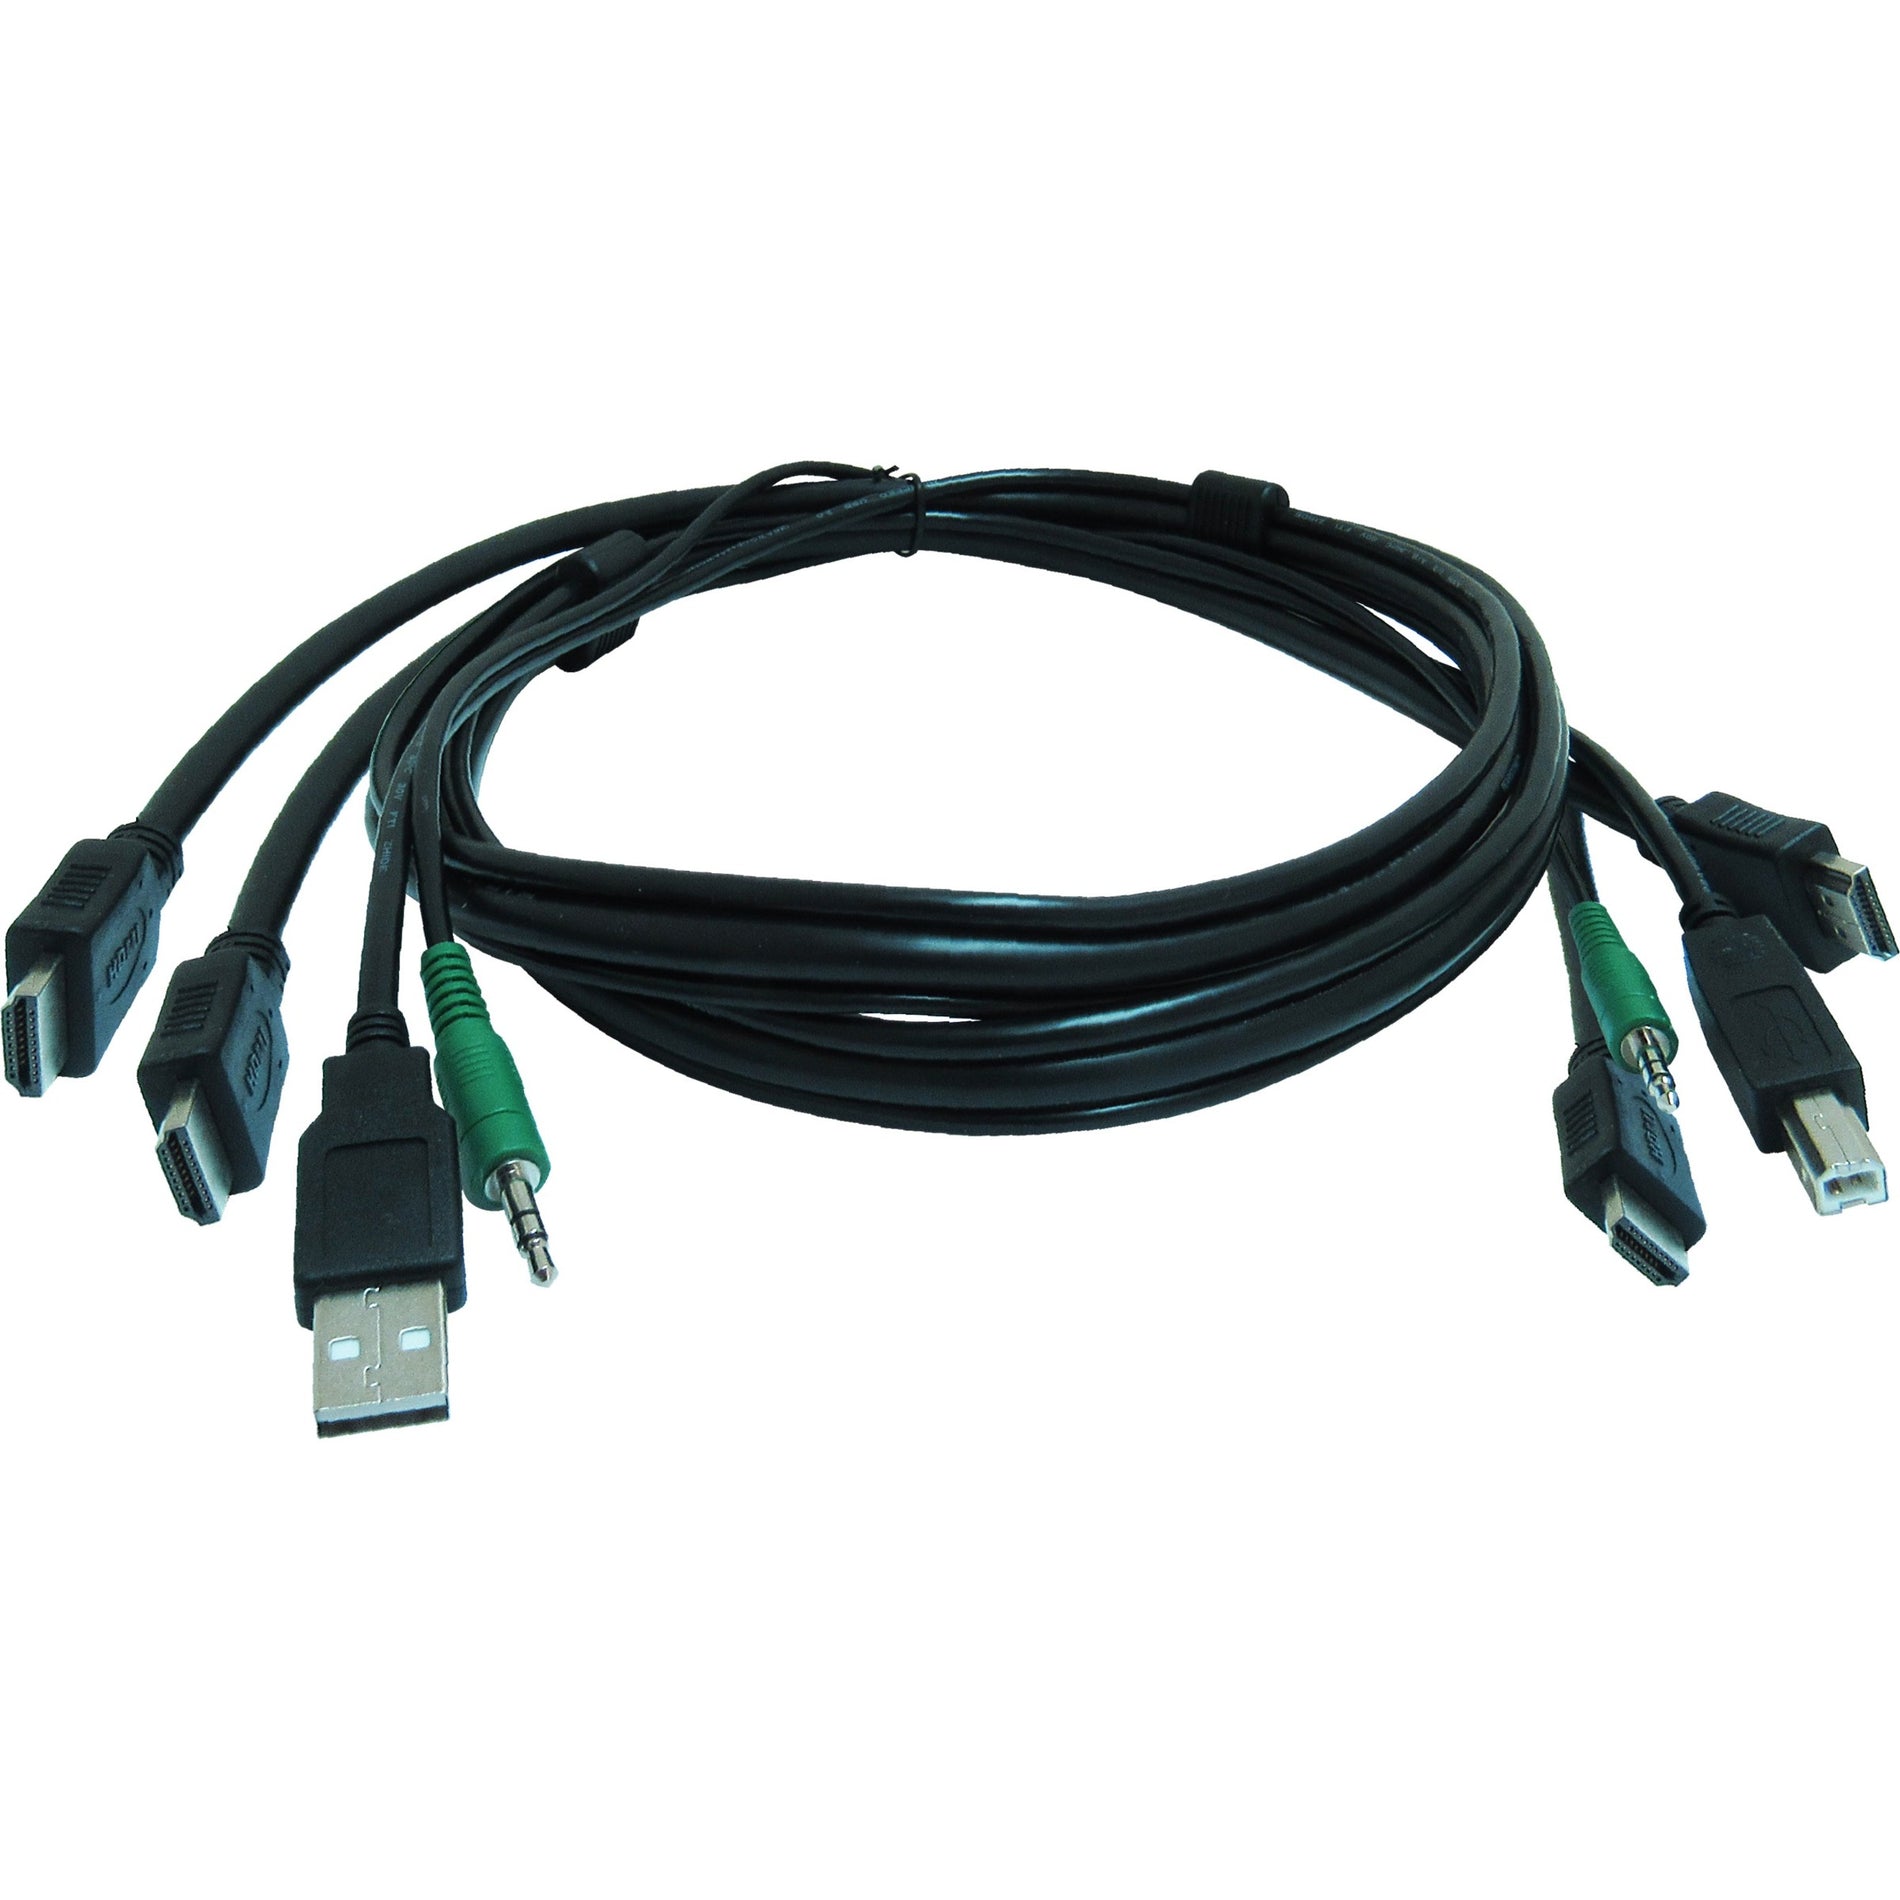 iPGARD CC2HDMMKVM10 10 ft KVM USB Dual HDMI Cable with Audio, Easy Plug-and-Play Solution for KVM Switches